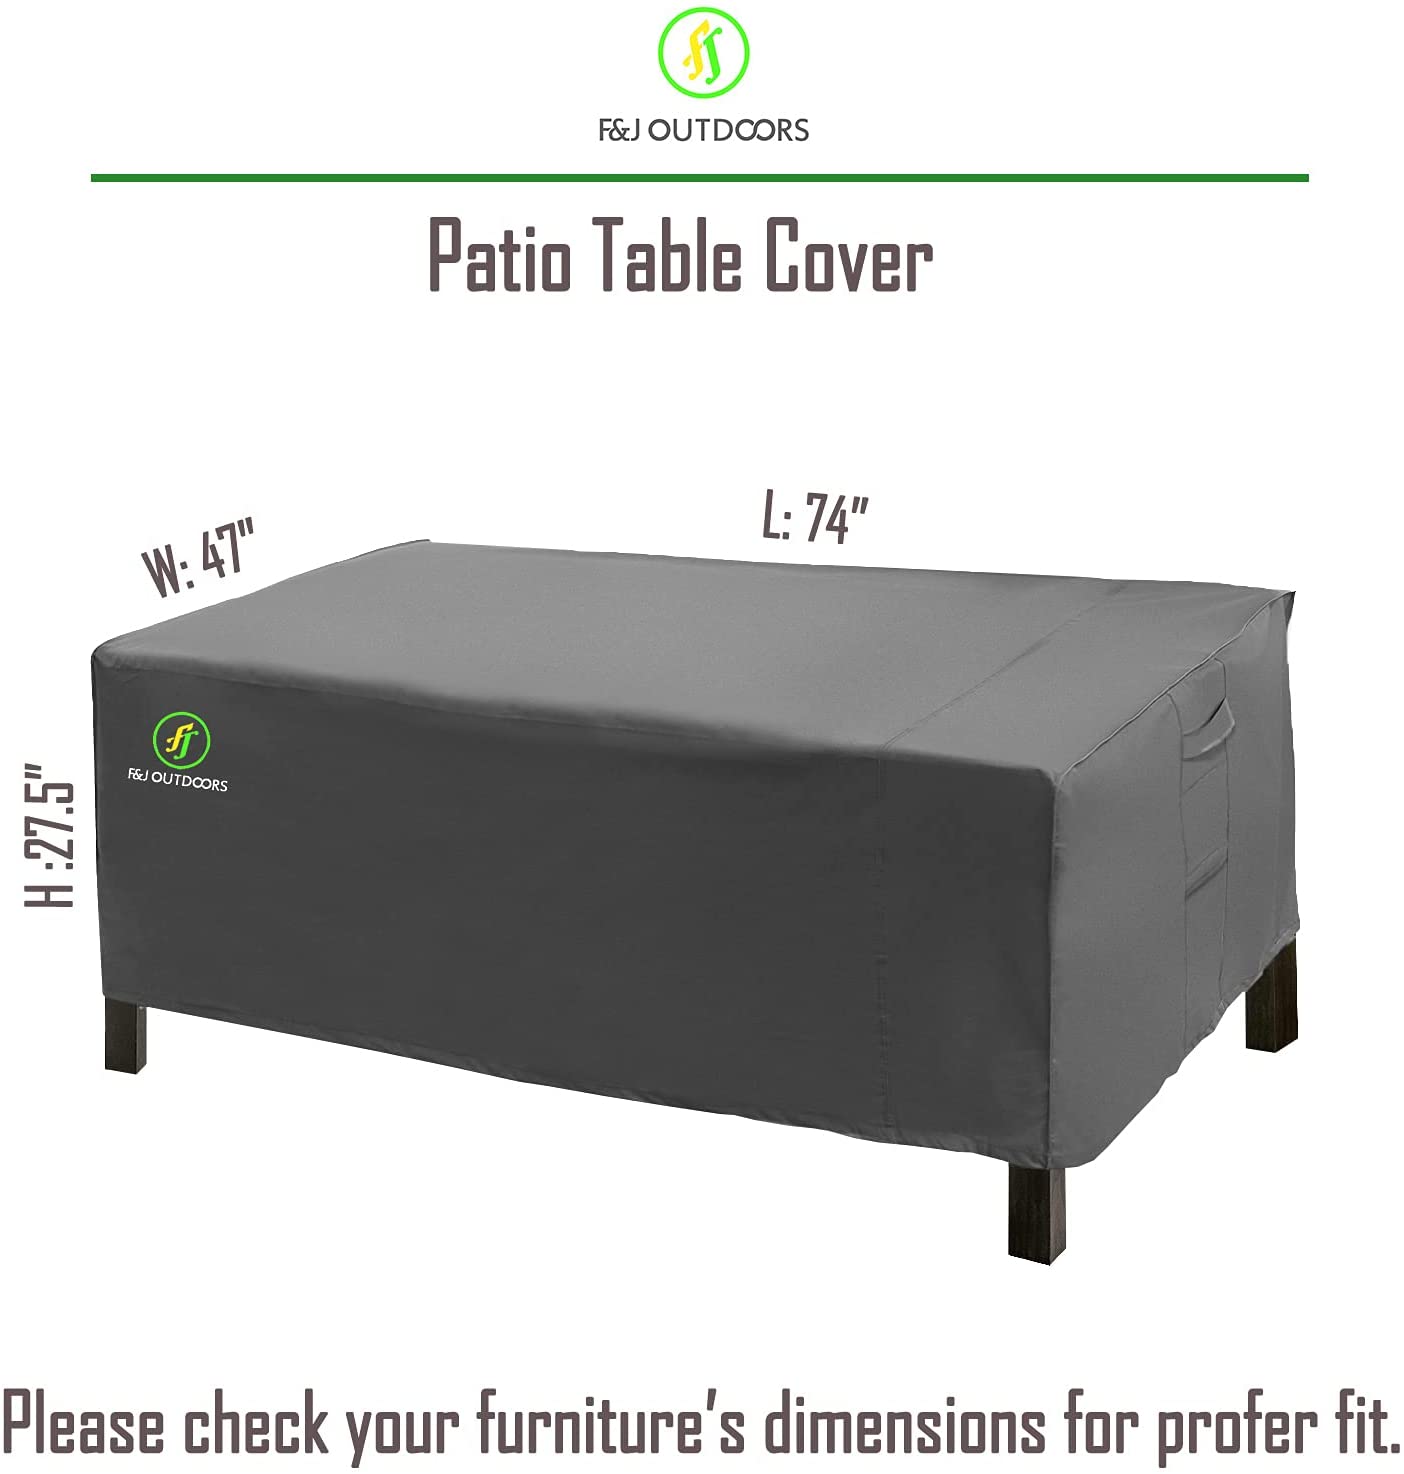 Patio Table Covers for Outdoor Furniture